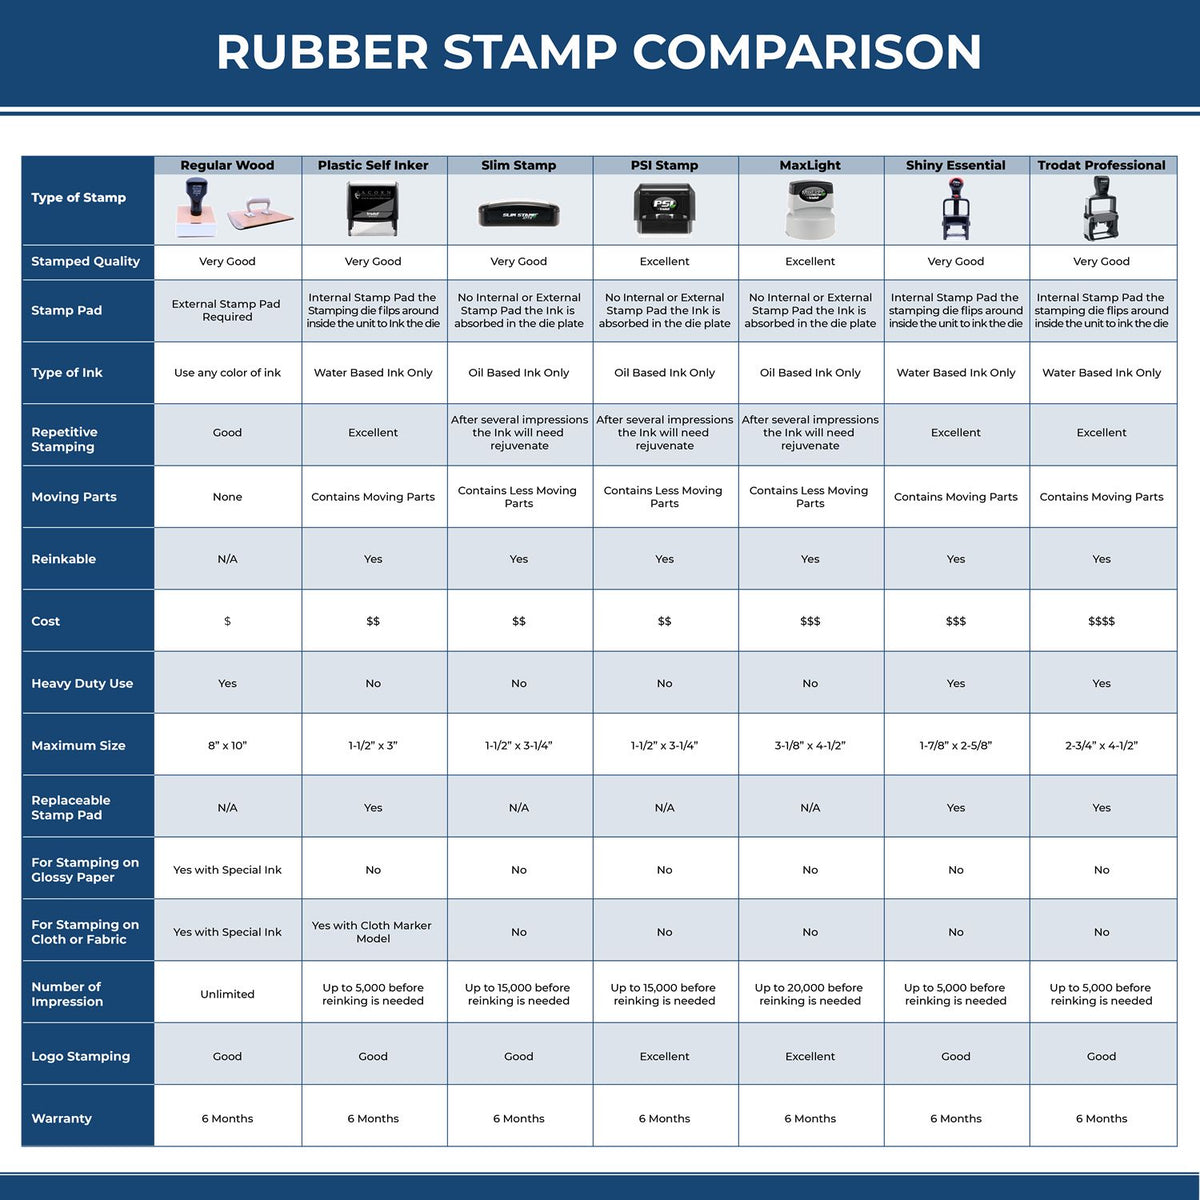 A comparison chart for the different types of mount models available for the PSI Nebraska Notary Stamp.